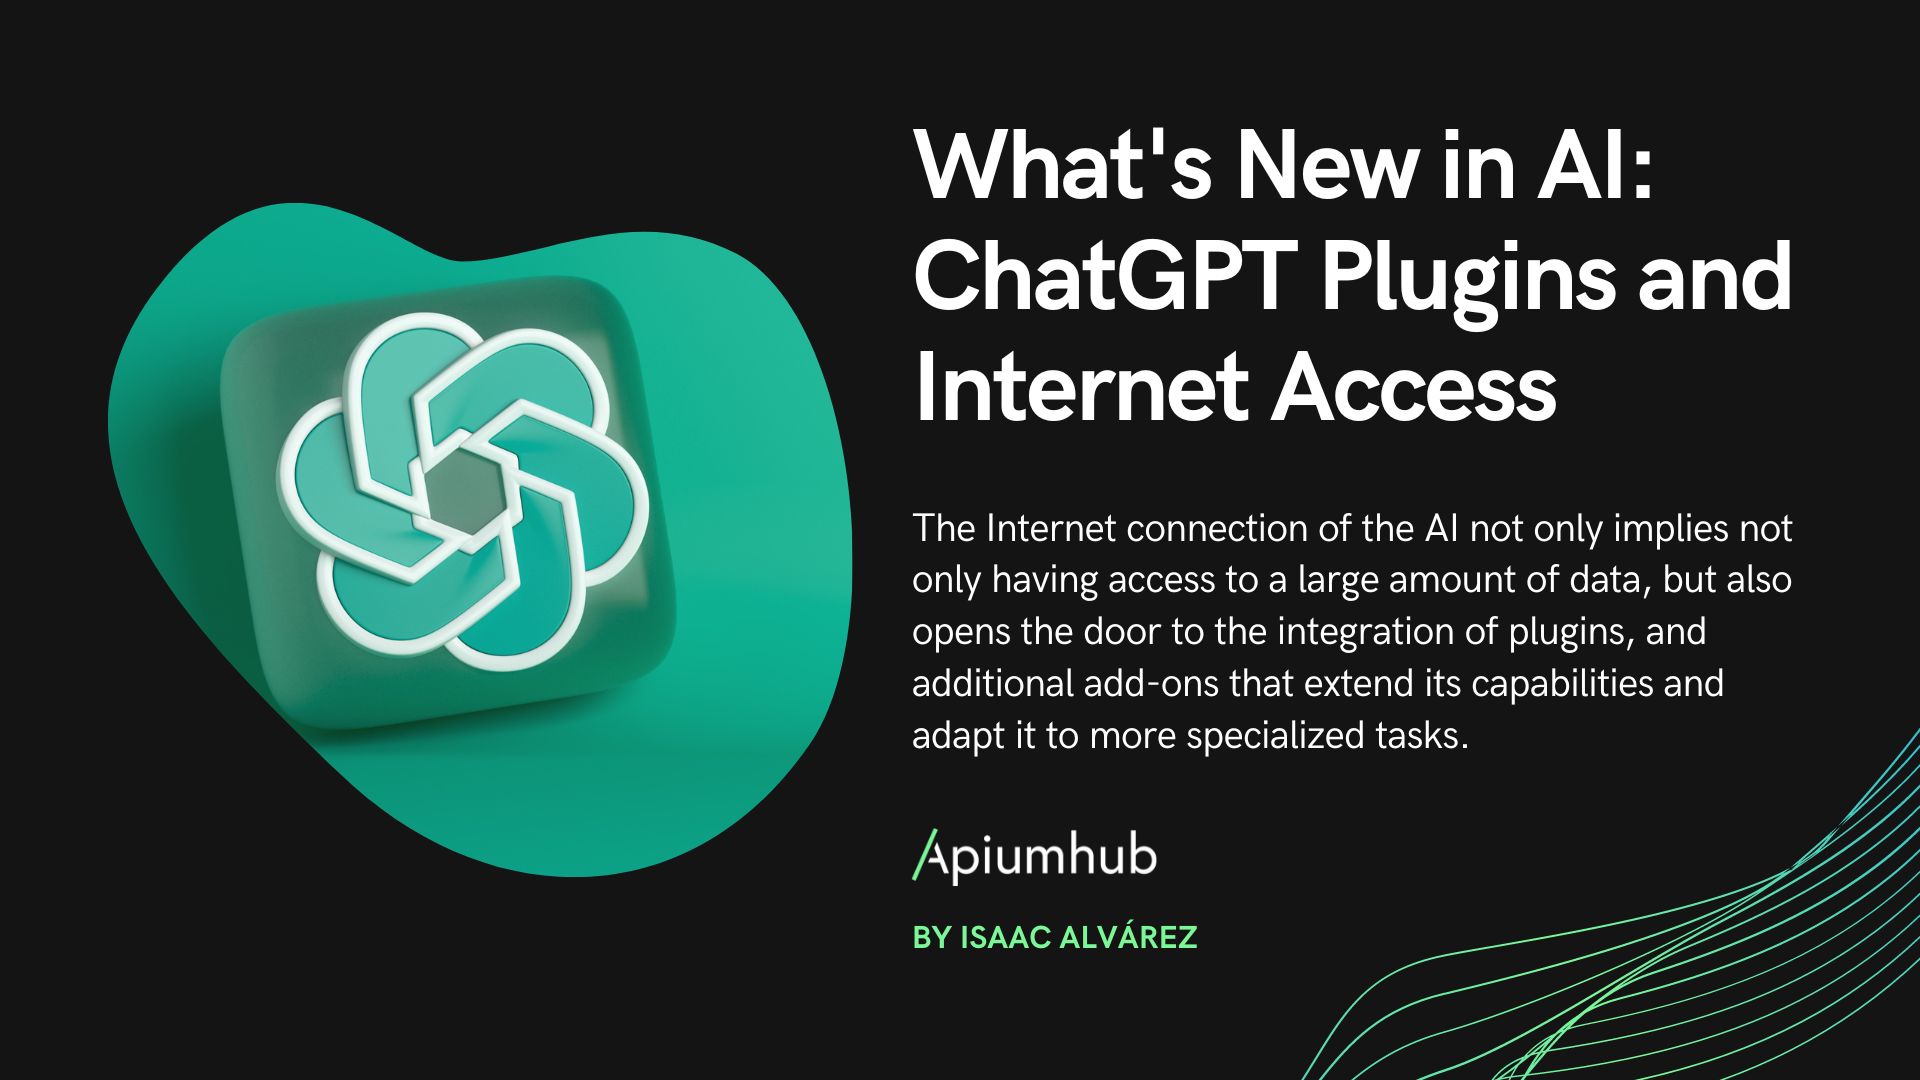 ChatGPT plugins and internet access